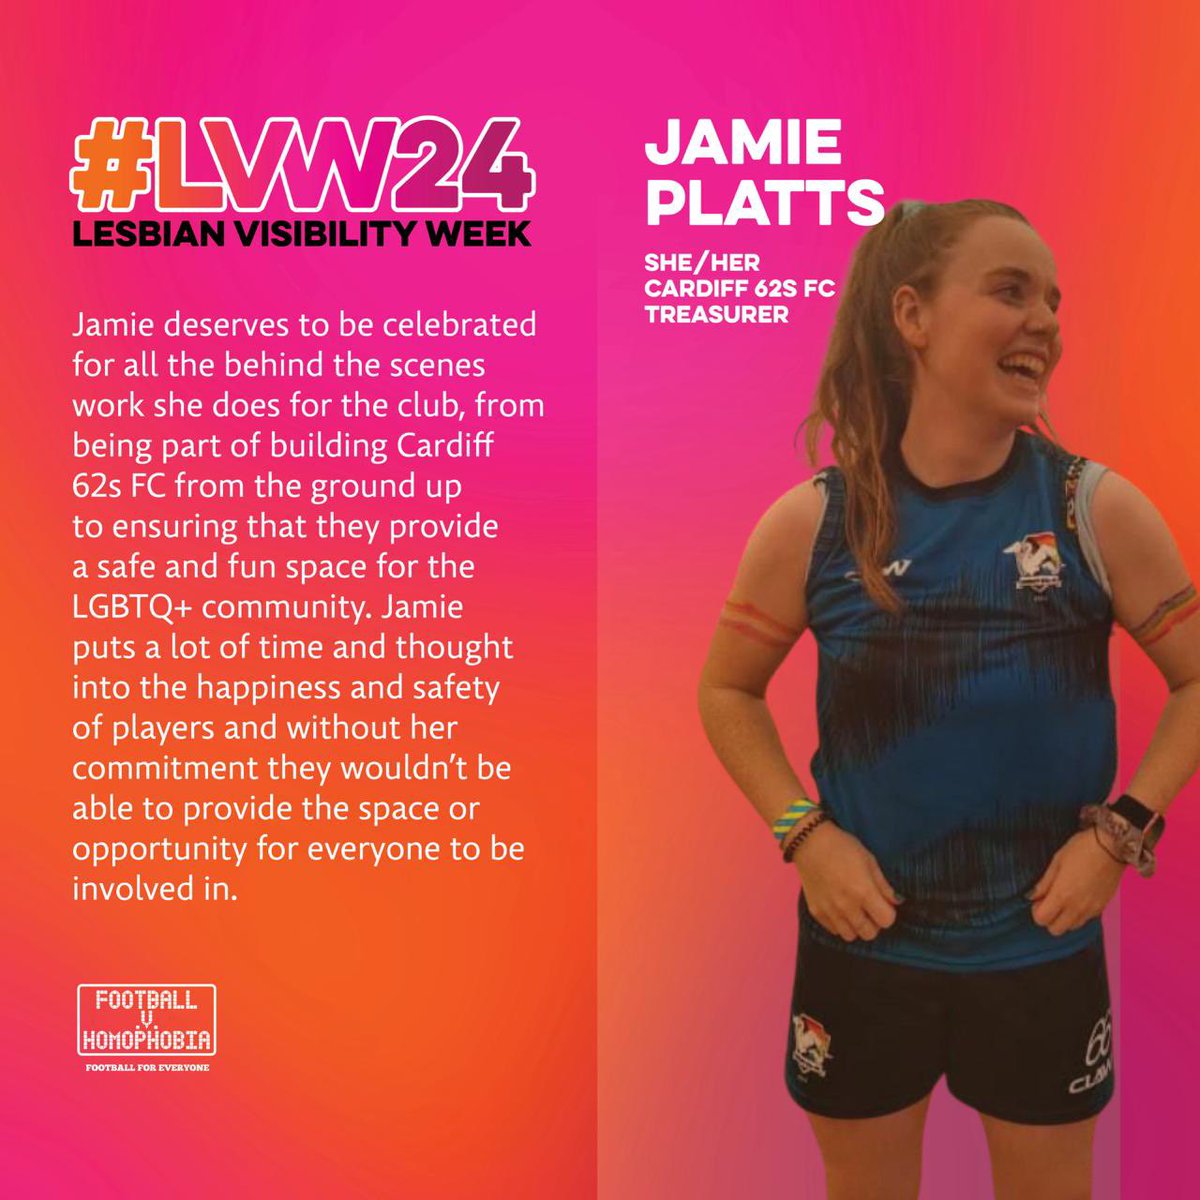 Today we are celebrating Jamie Platts from @Cardiff62sFC for #LesbianVisibilityWeek Jamie deserves to be celebrated for all the behind the scenes work she does for the club 🙌 #LVW24 | #unifiednotuniform